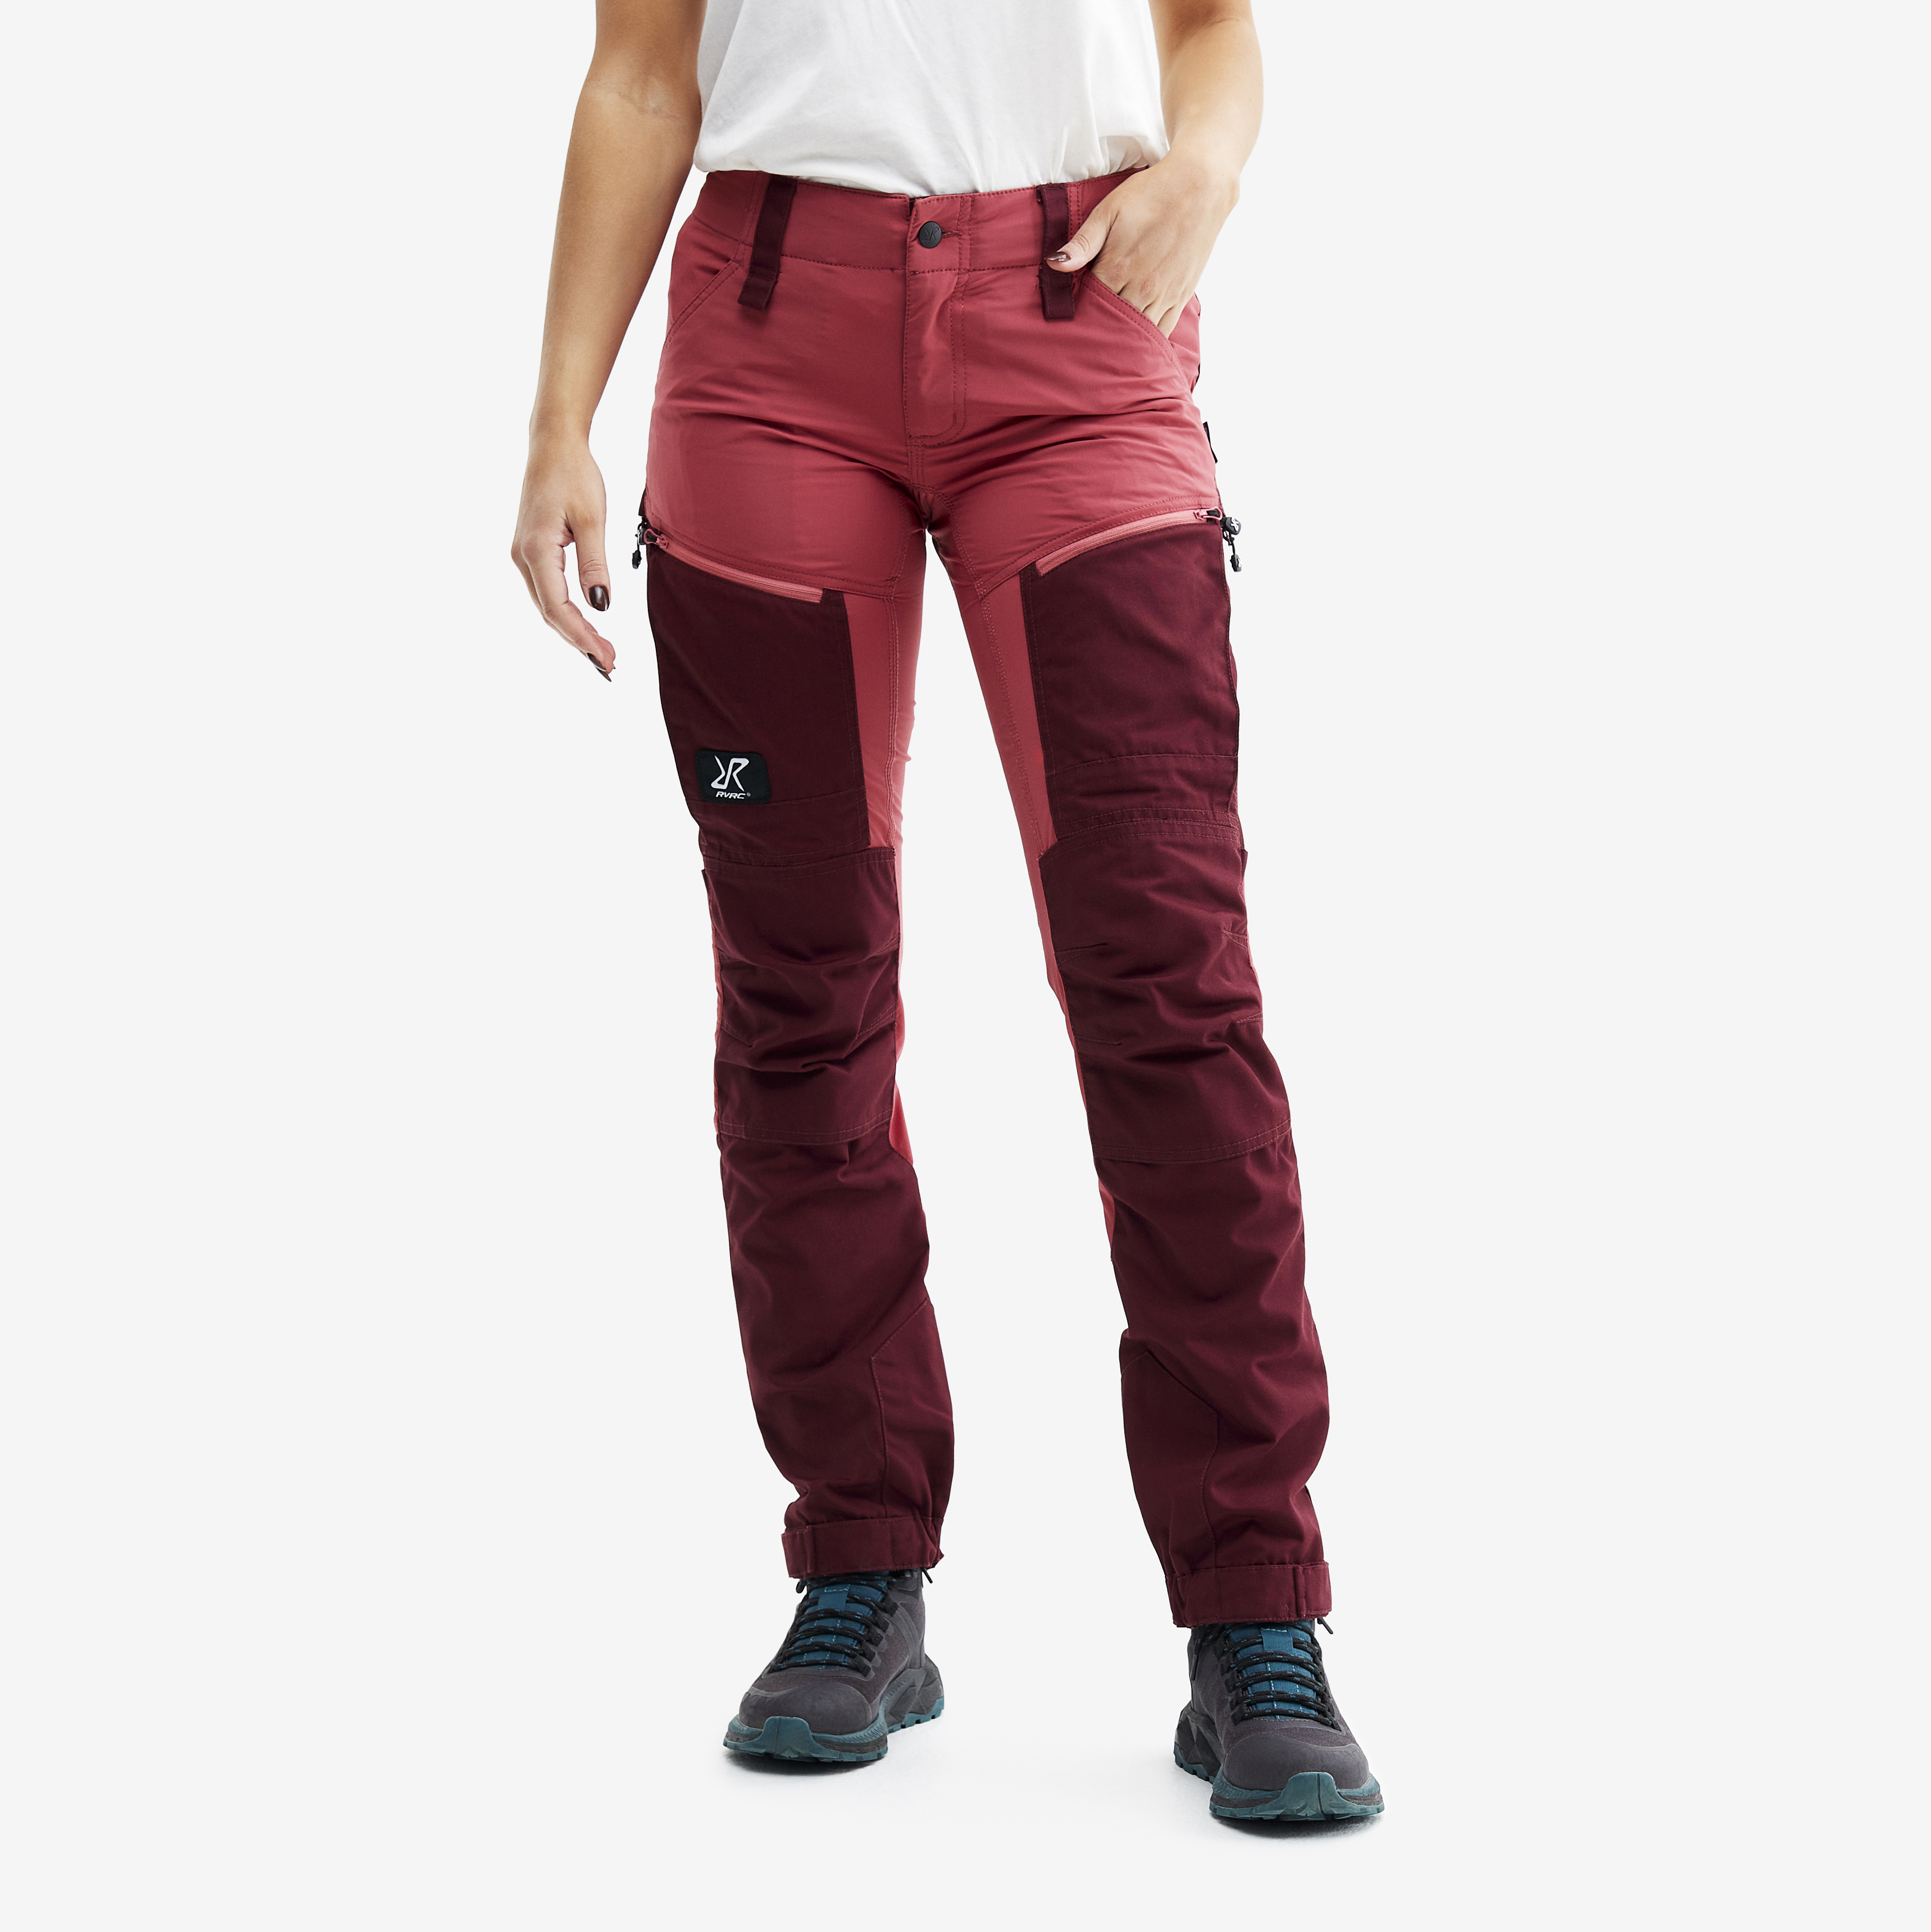 RVRC GP Pro hiking trousers for women in pink